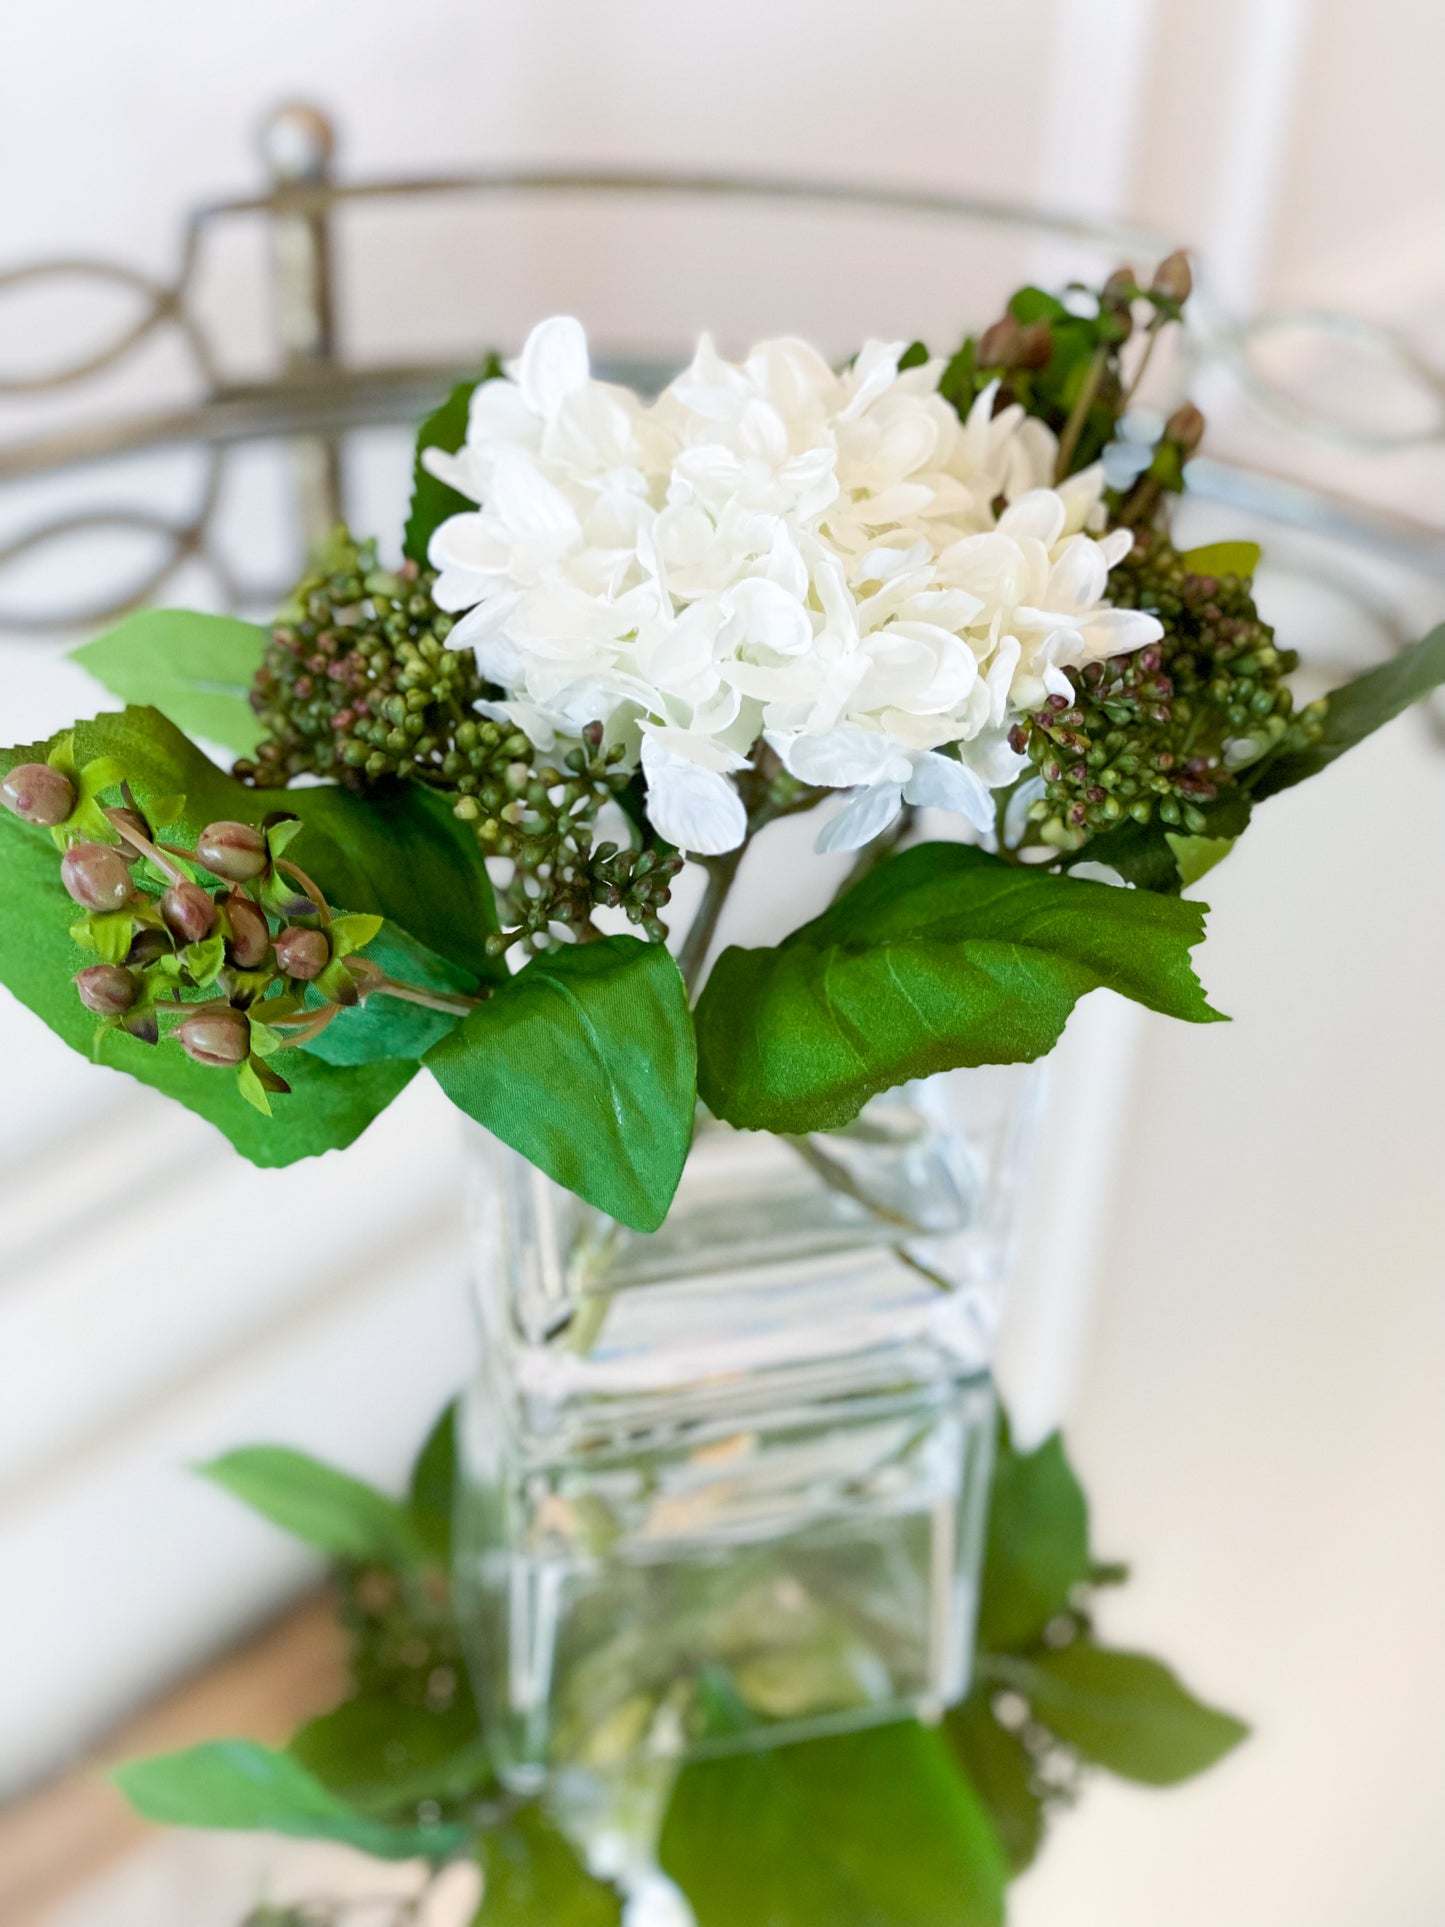 White Hydrangea And Sedum In A Glass Vase With Acrylic Water